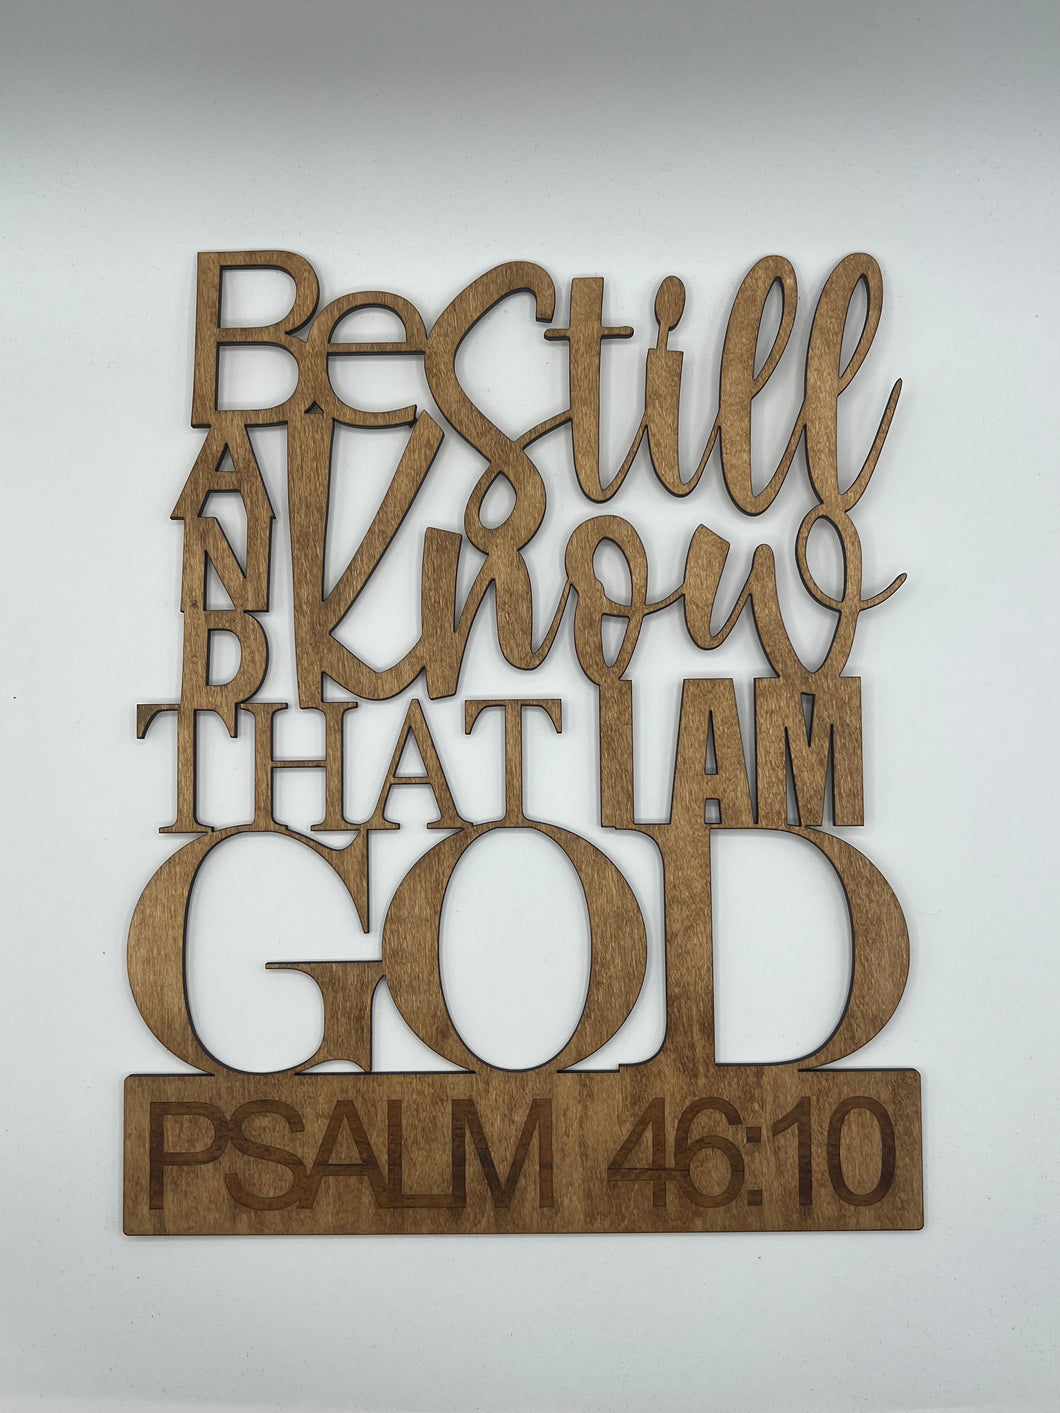 Psalms 46:10 - Be still and know that I am God